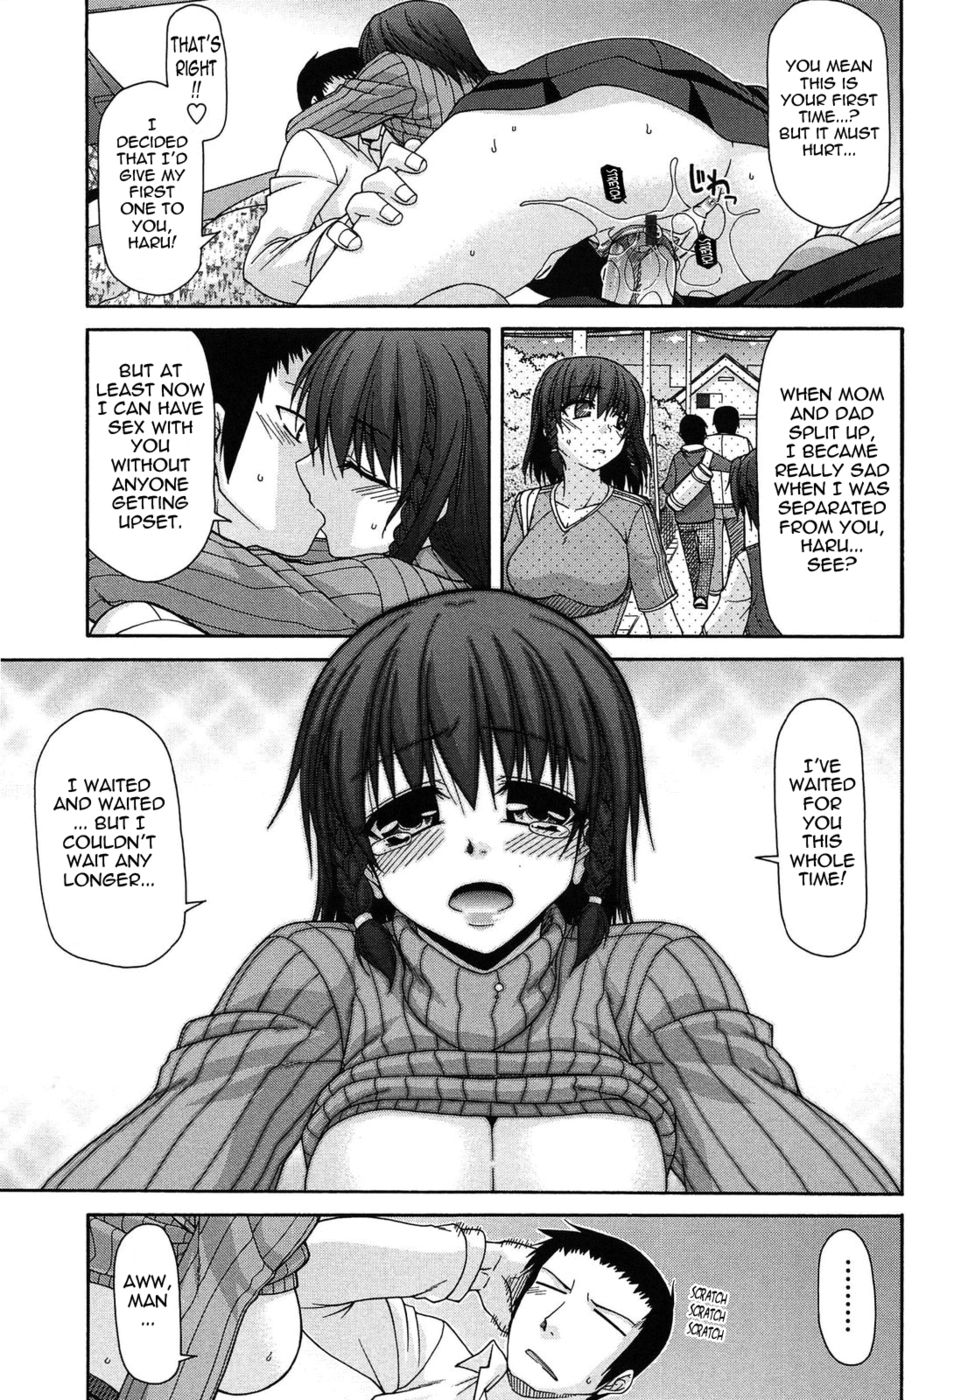 Nopelsex - More than Big Sister and Little Brother, Less than Big Sister and Little  Brother-Chapter 1-Hentai Manga Hentai Comic - Page: 11 - Online porn video  at mobile